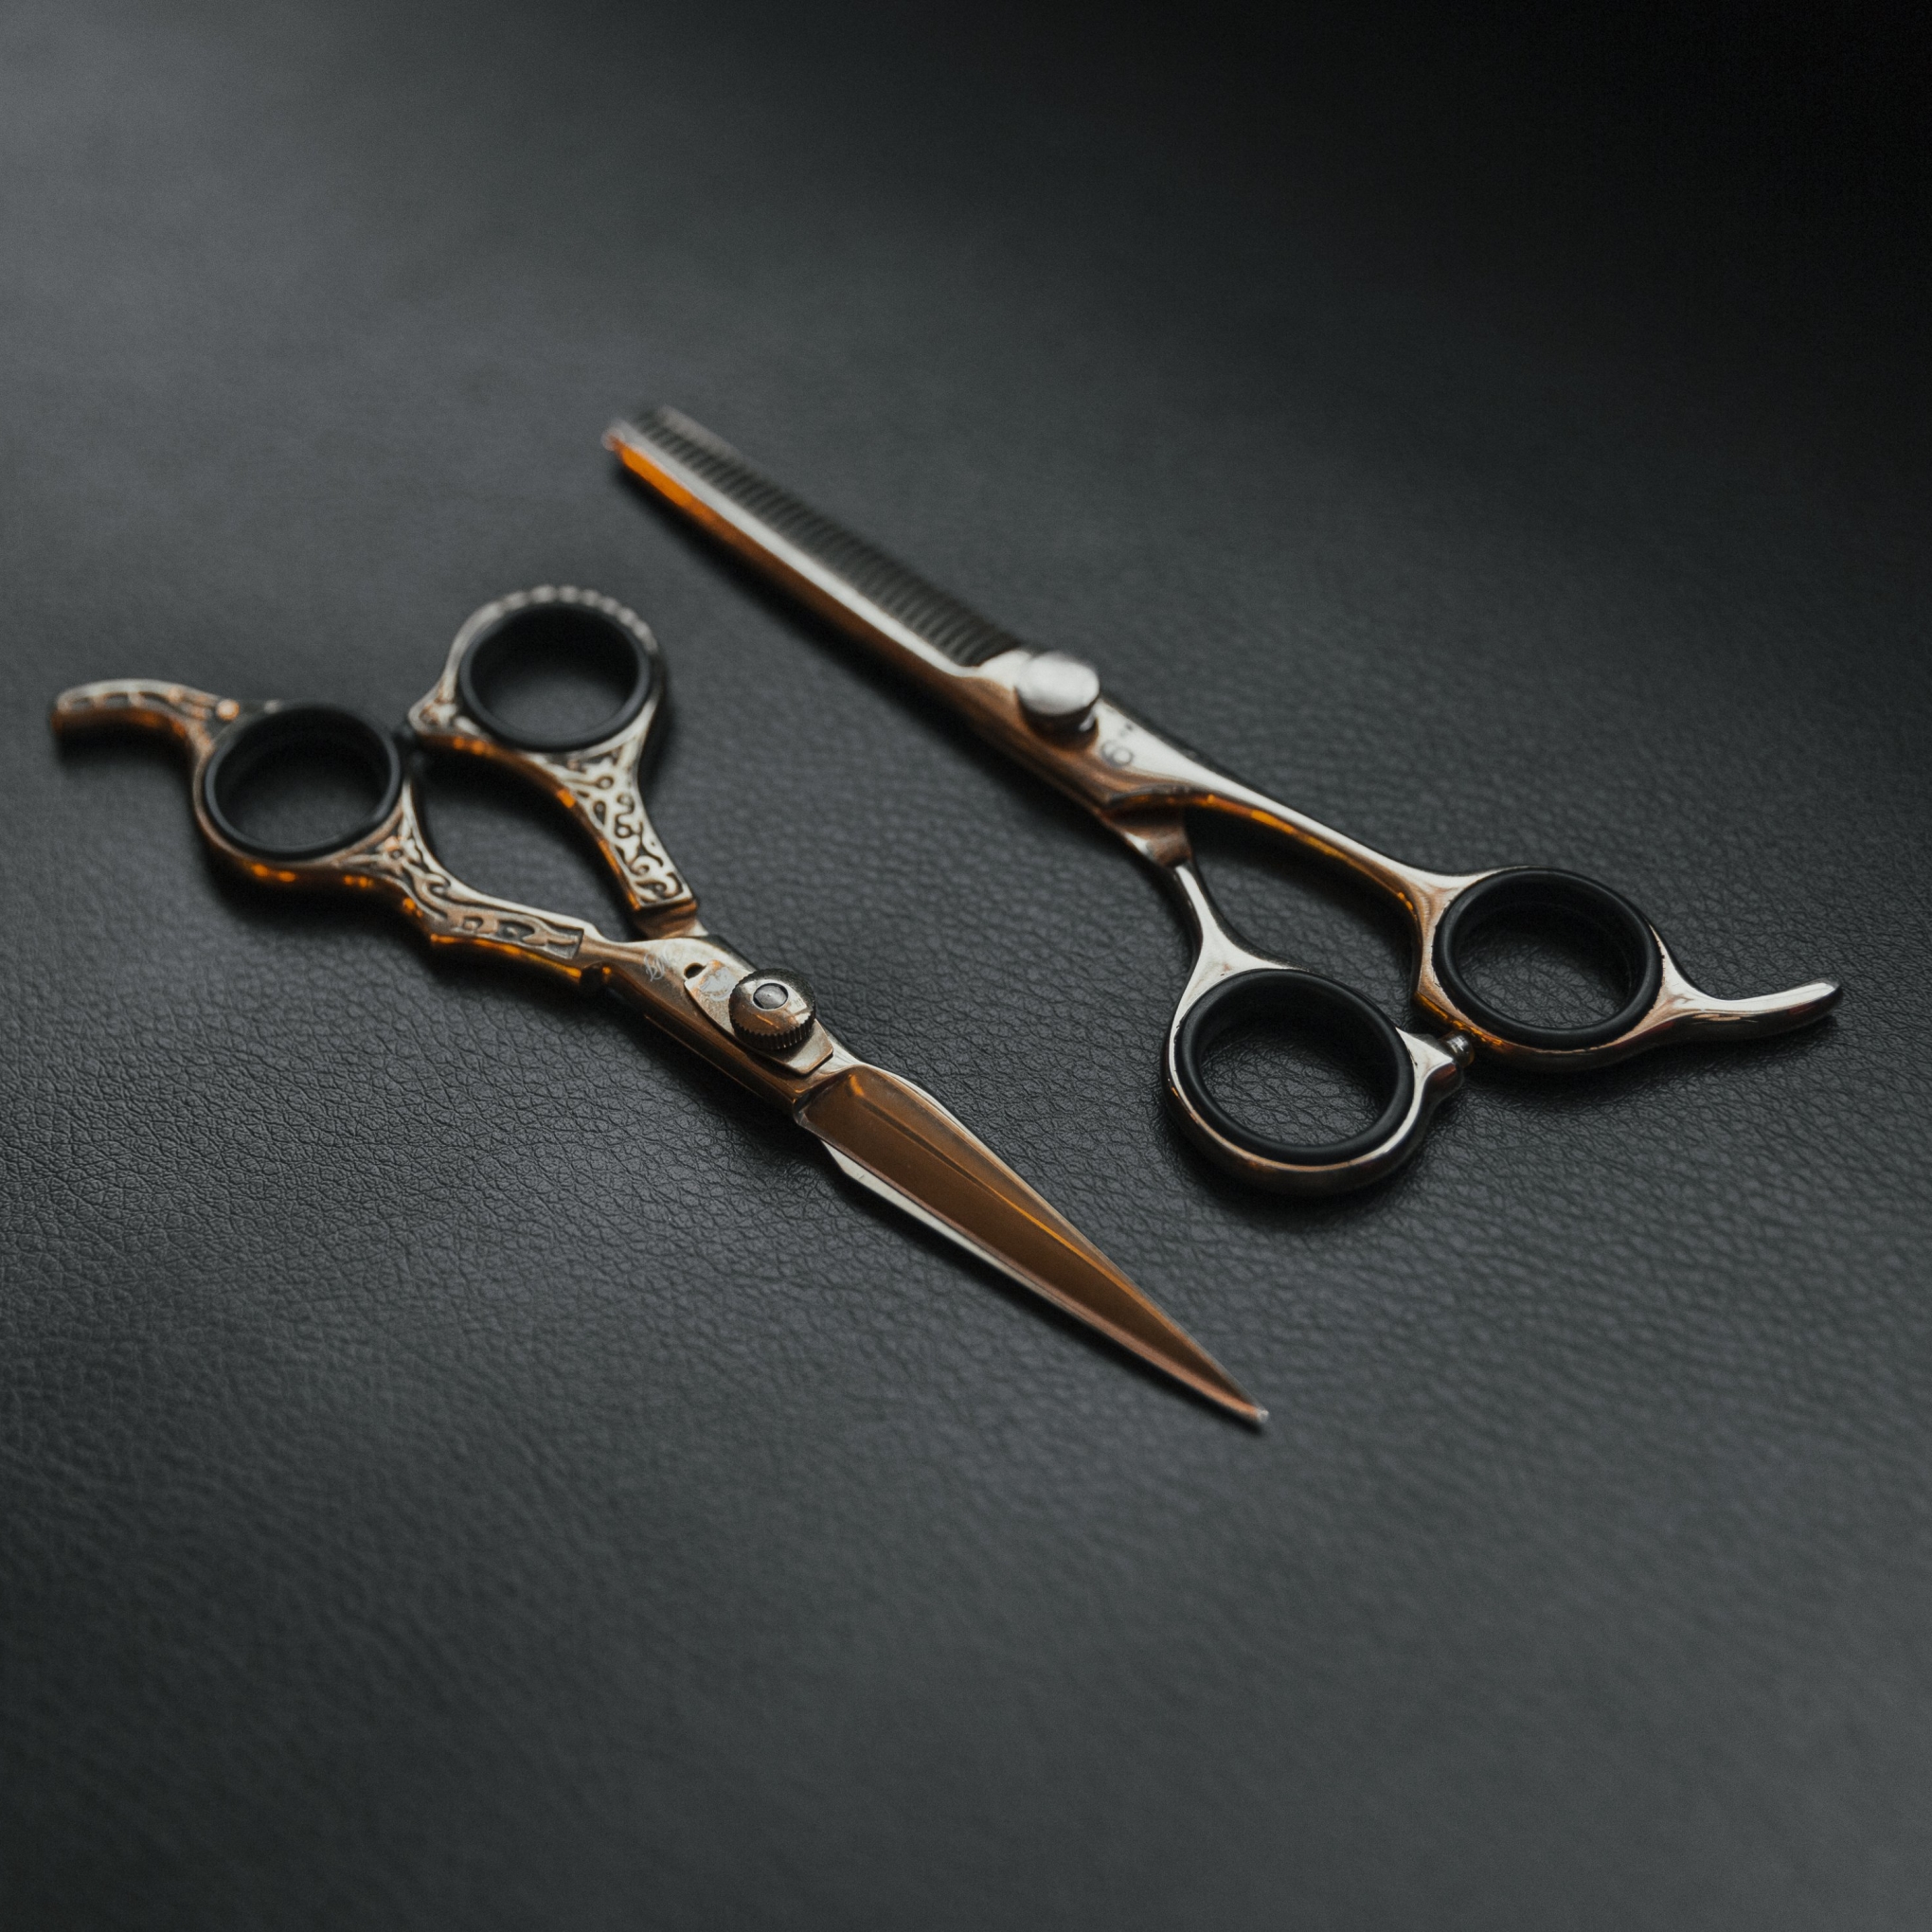 Two Sets Of Barber Scissors